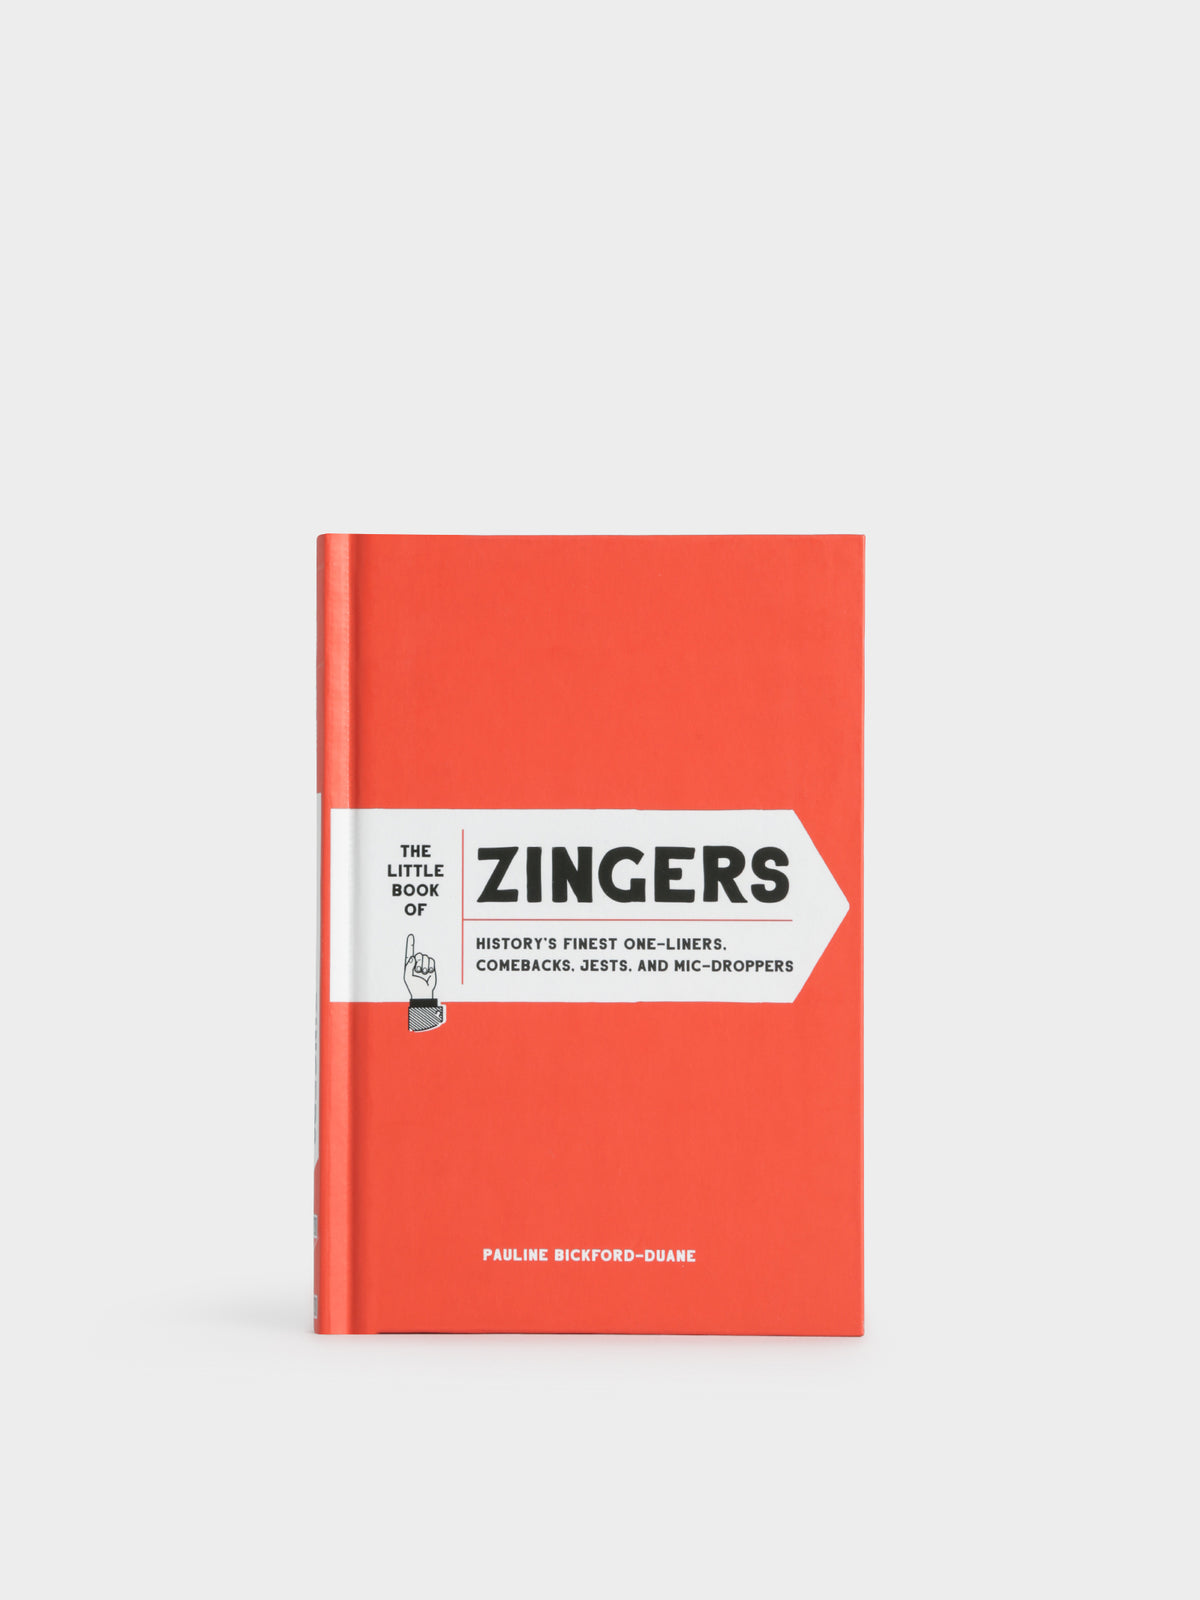 The Little Book of Zingers